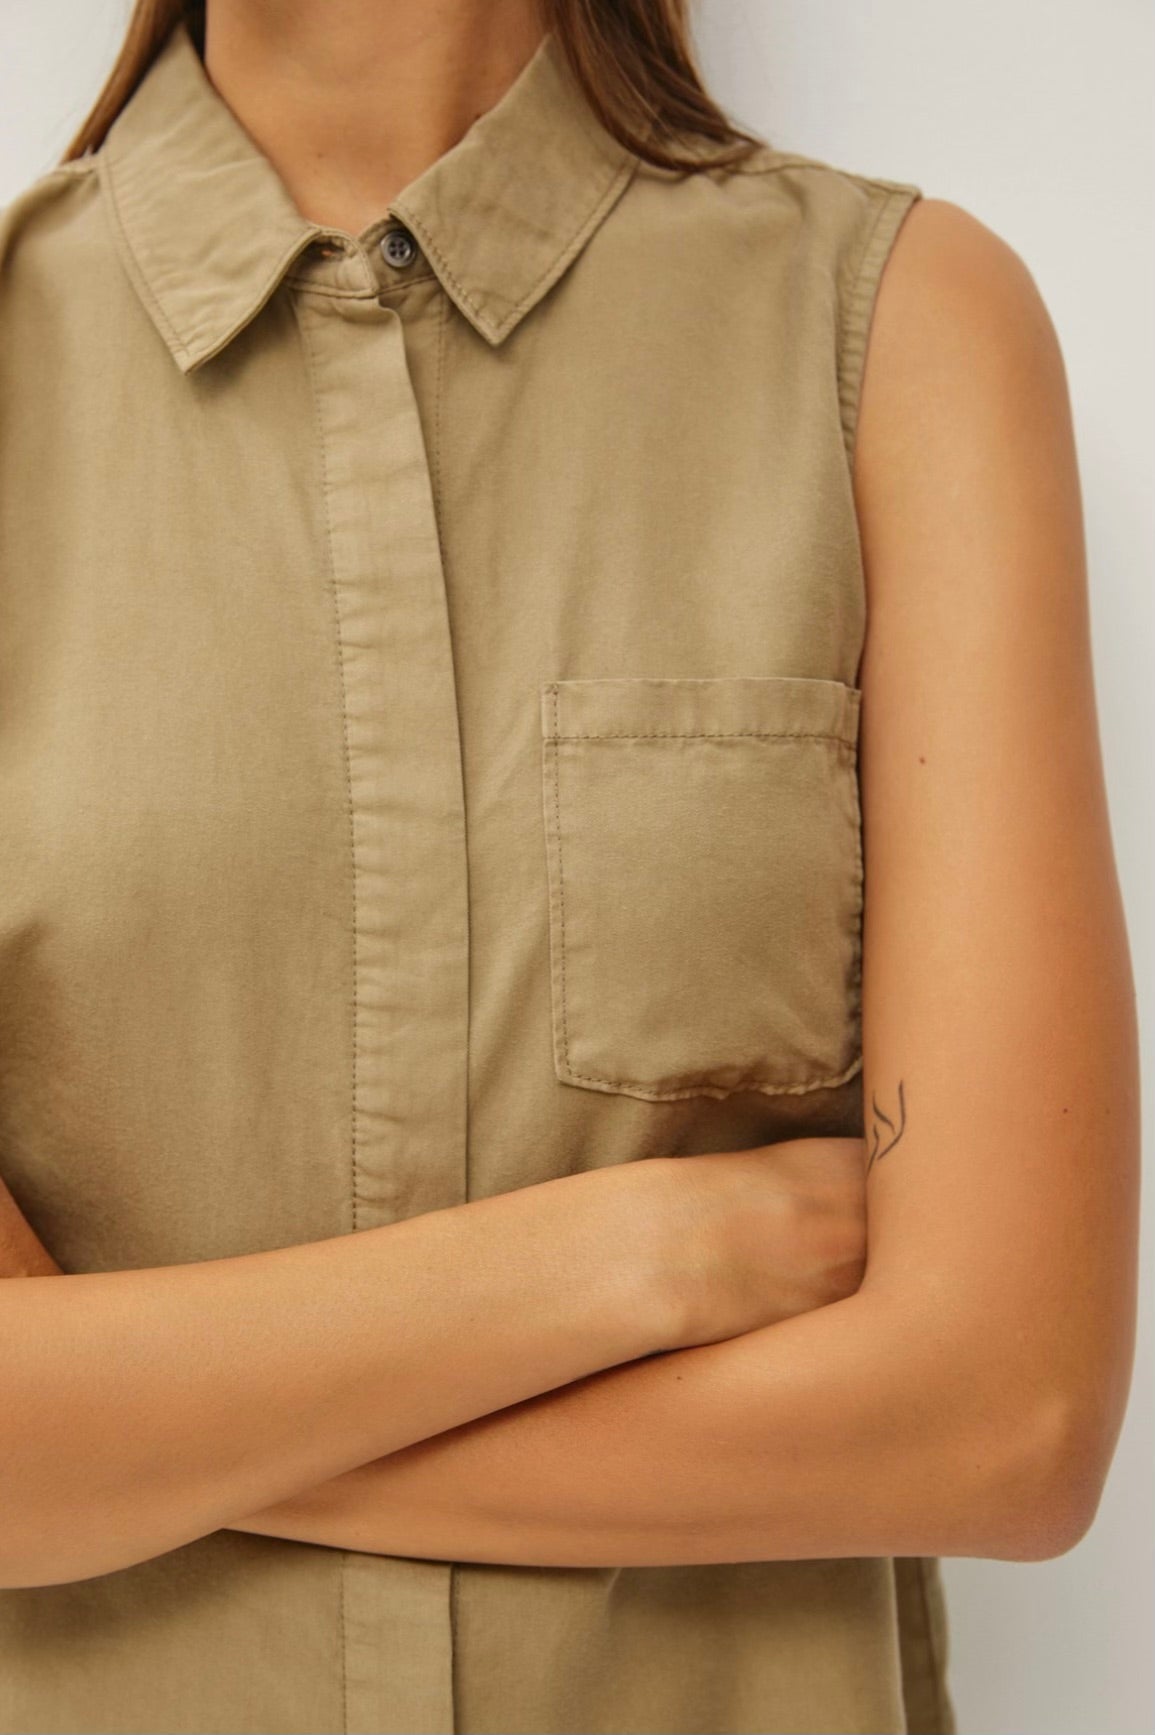 Olive Sleeveless Collared Top